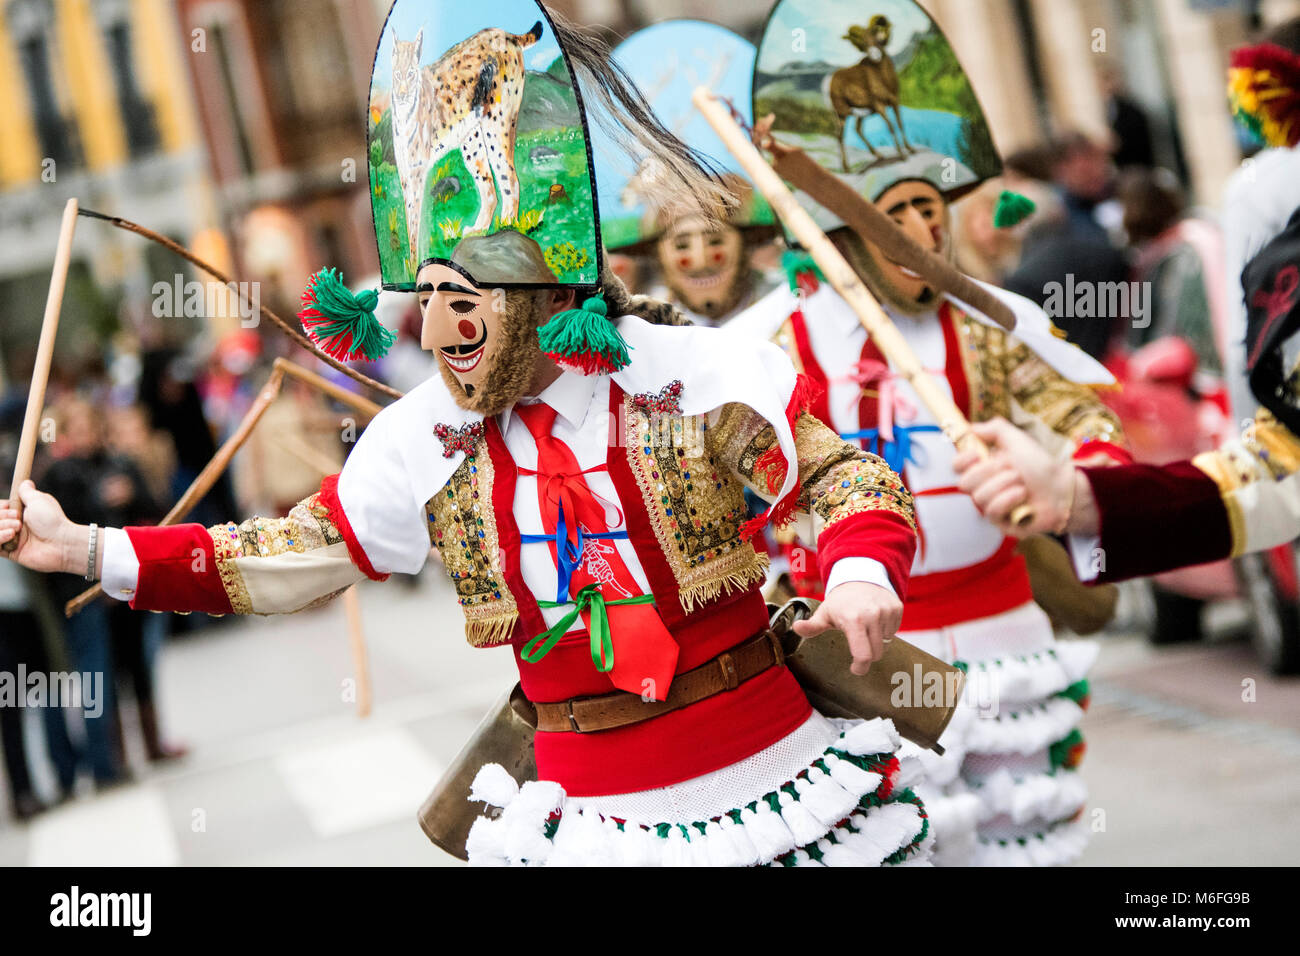 Siero, Spain. 3rd March, 2018. Os peliqueiros, a Spanish traditional mask  from Campobecerros (Ourense, Galicia, Spain), run during Mazcaraes  d'Iviernu, an Iberian Mask Festival celebrated on March 3, 2018 in Siero,  Asturias,